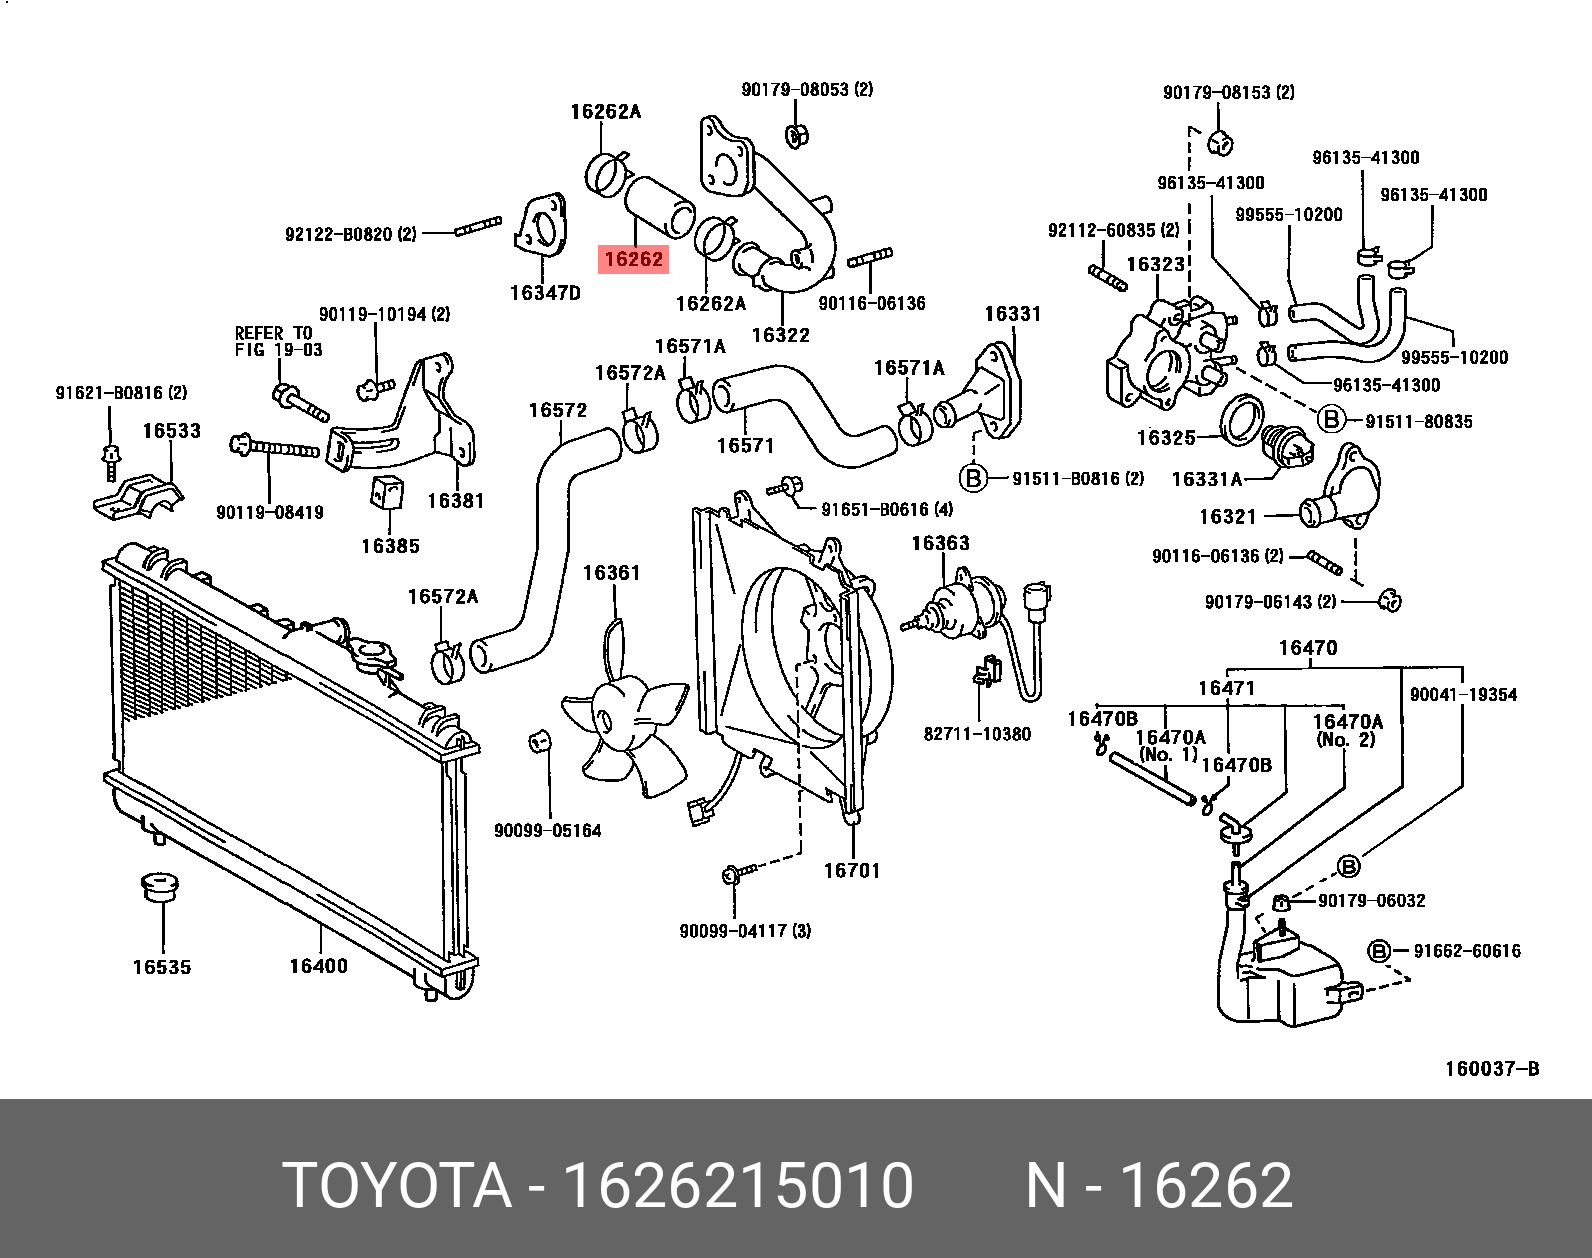 COROLLA LEVIN 198705 - 199106, HOSE, WATER INLET